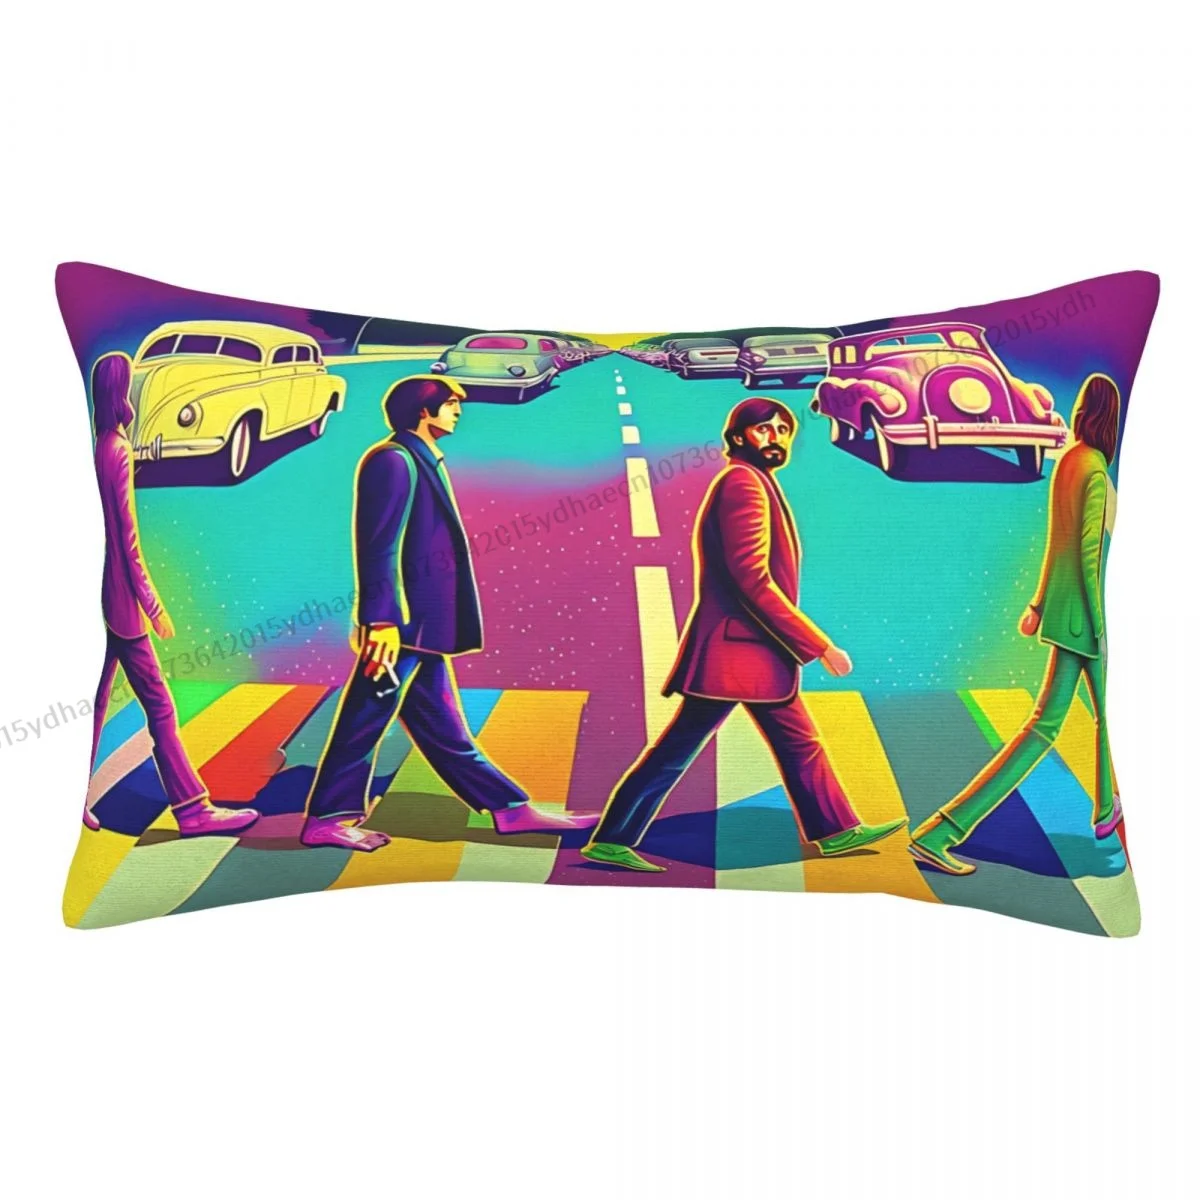 Abbey Acid Road Printed Pillow Case The Beatle Band Backpack Coussin Covers Reusable Chair Decor Pillowcase